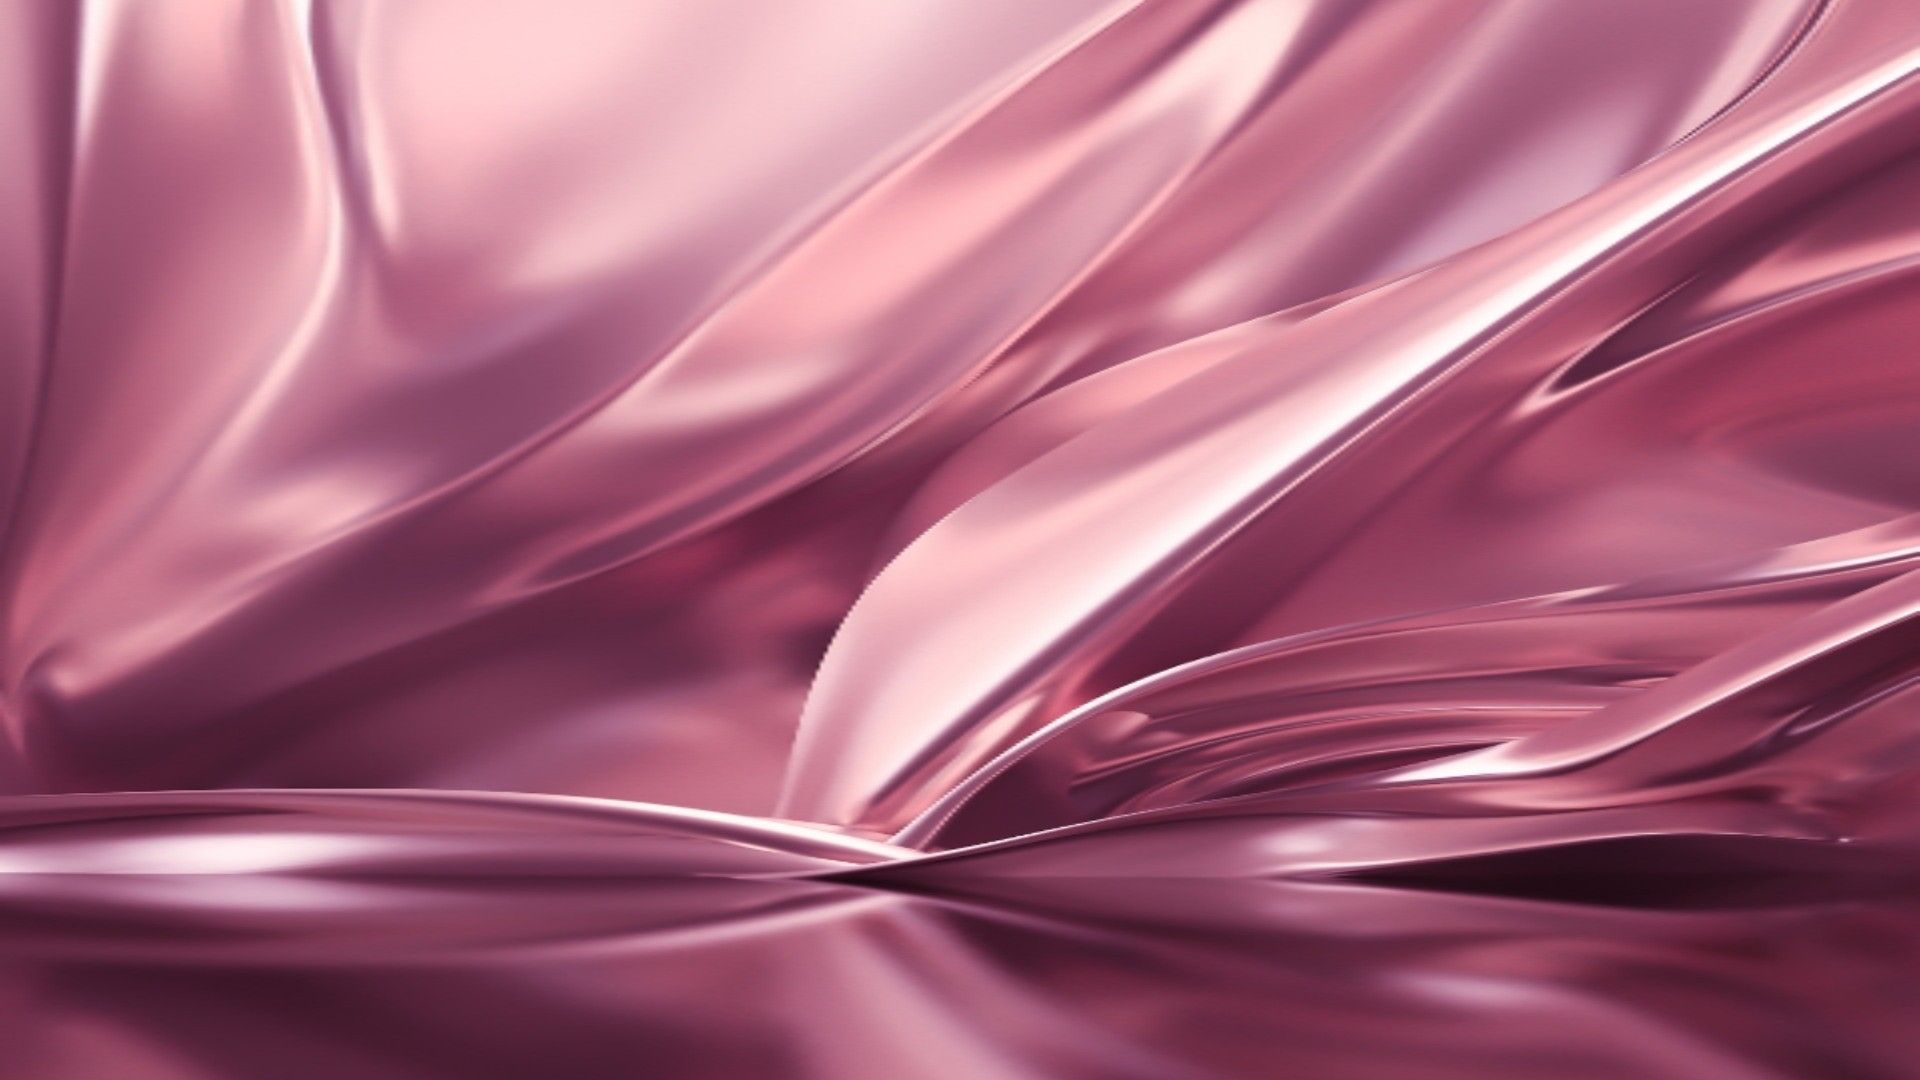 A 3D rendering of a liquid abstract background - Silk